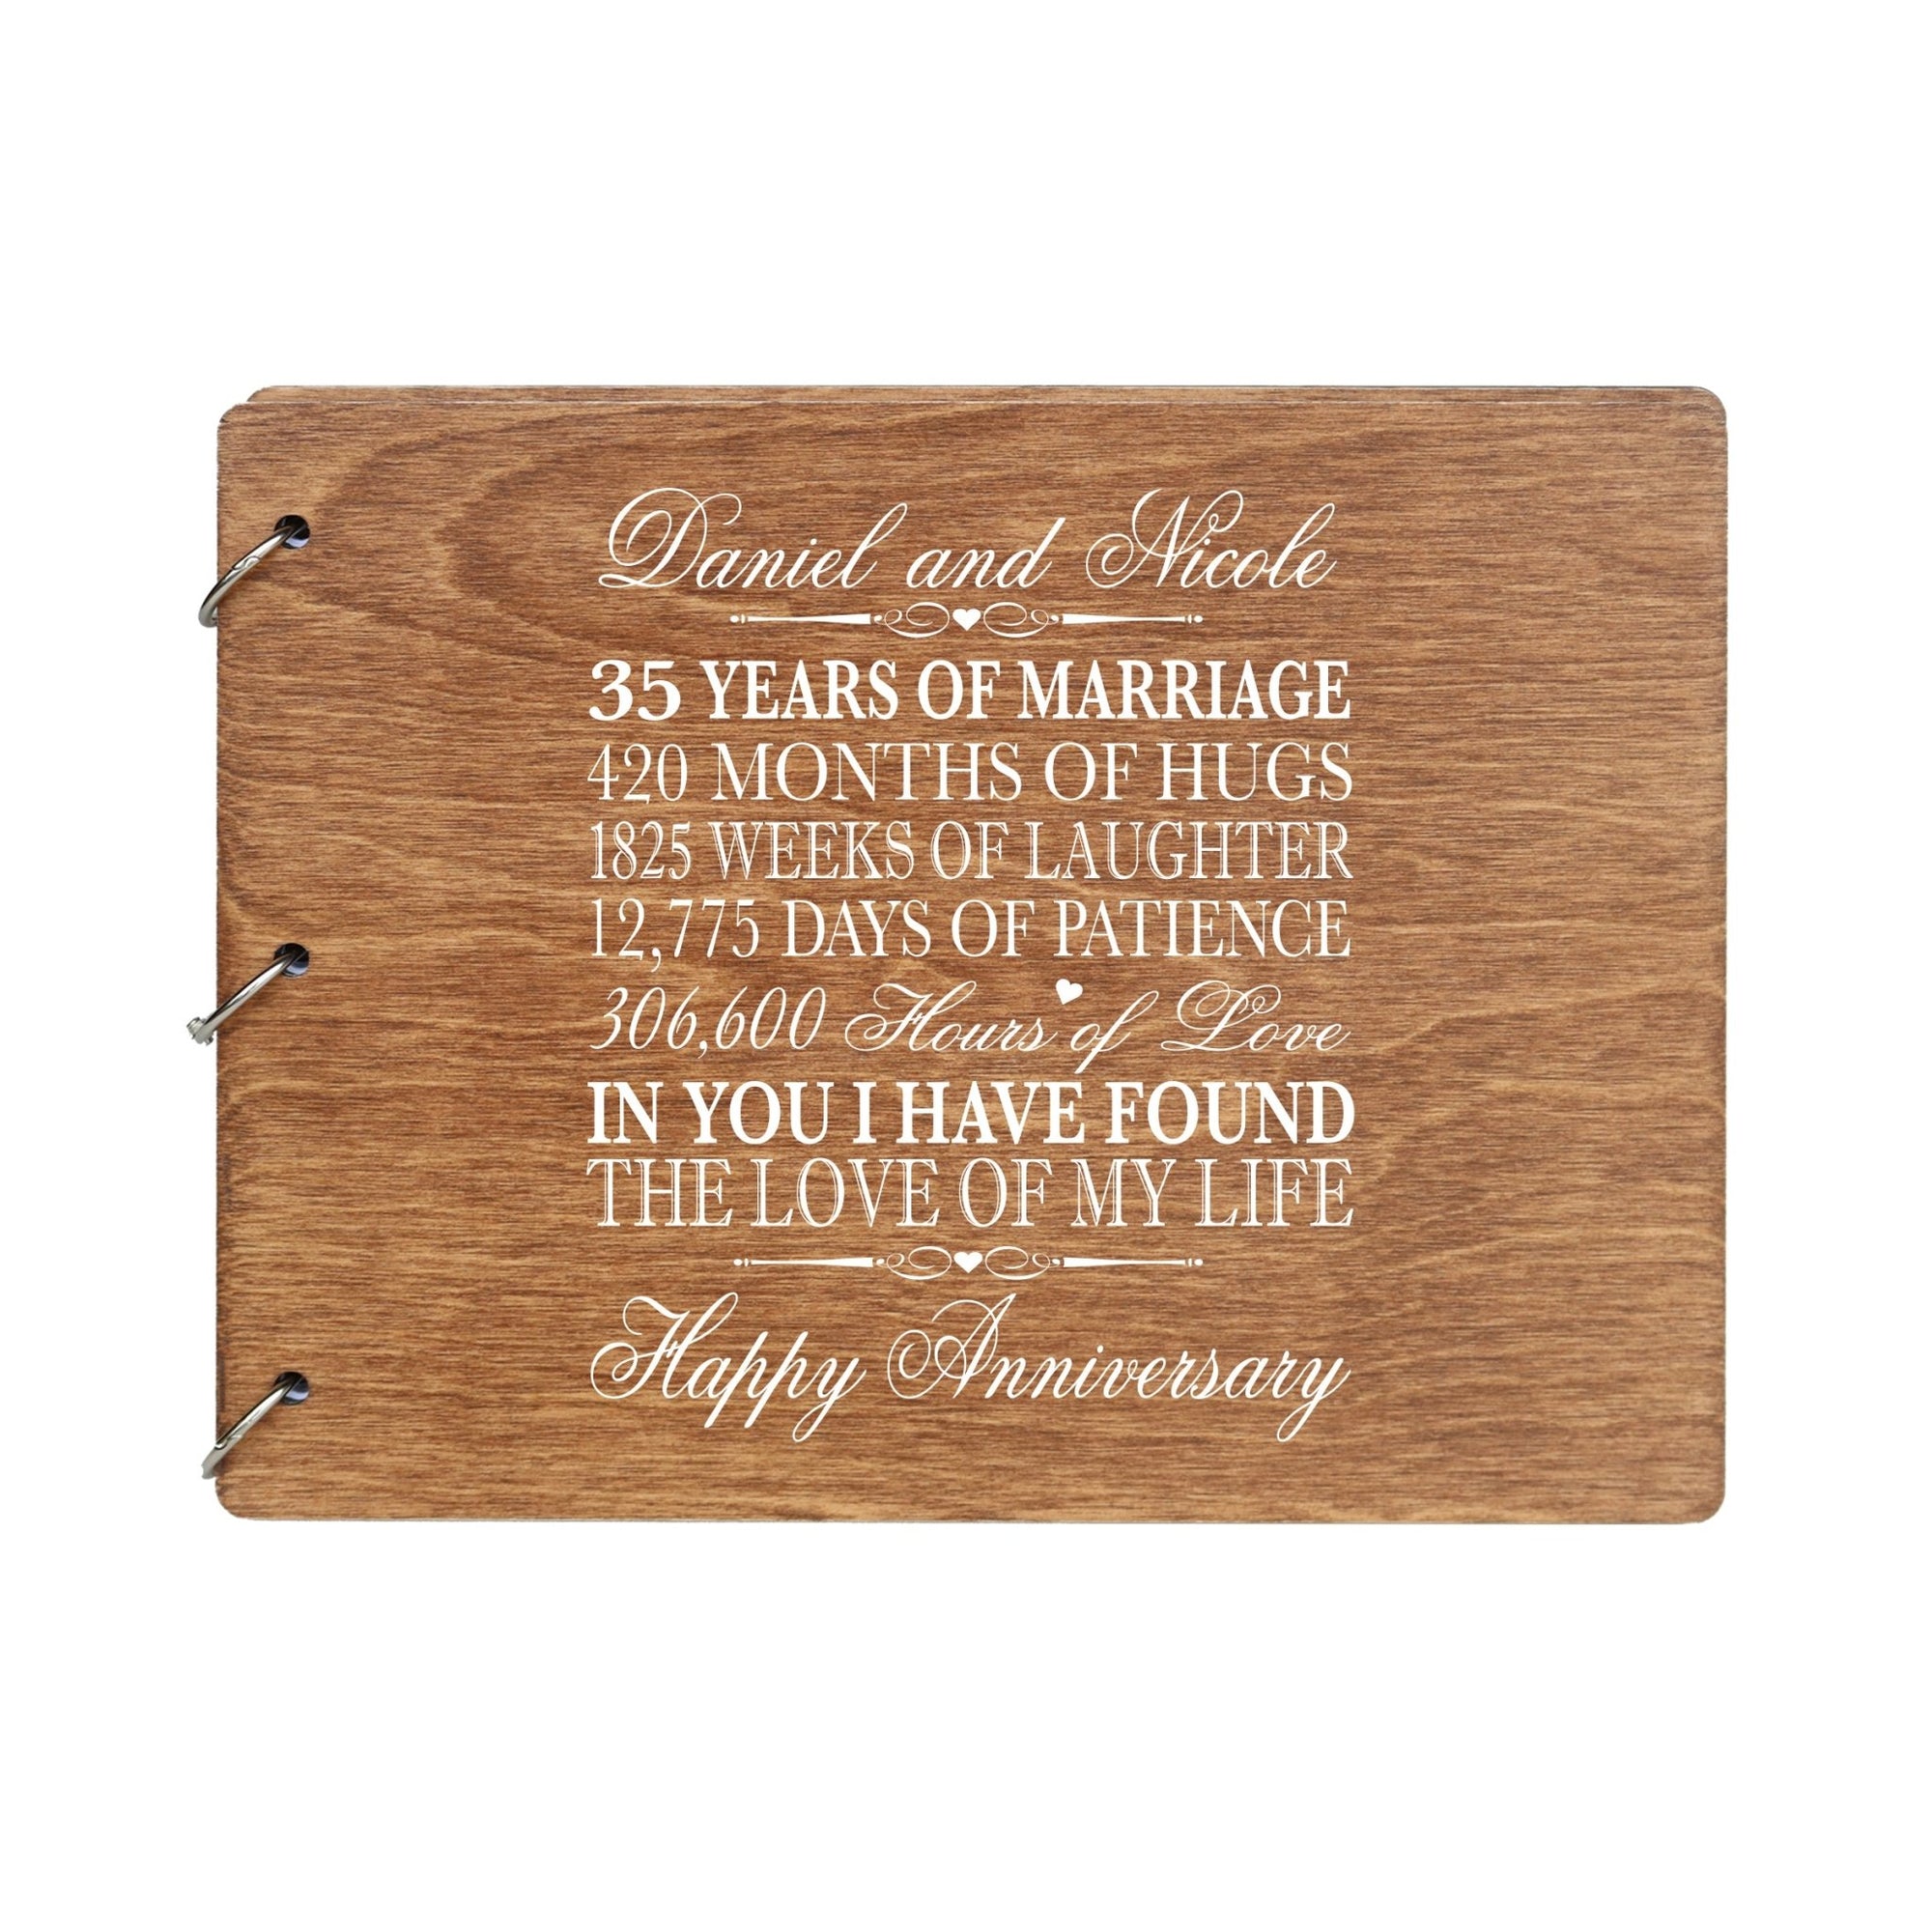 Personalized 35th Wedding Anniversary Guestbook - LifeSong Milestones